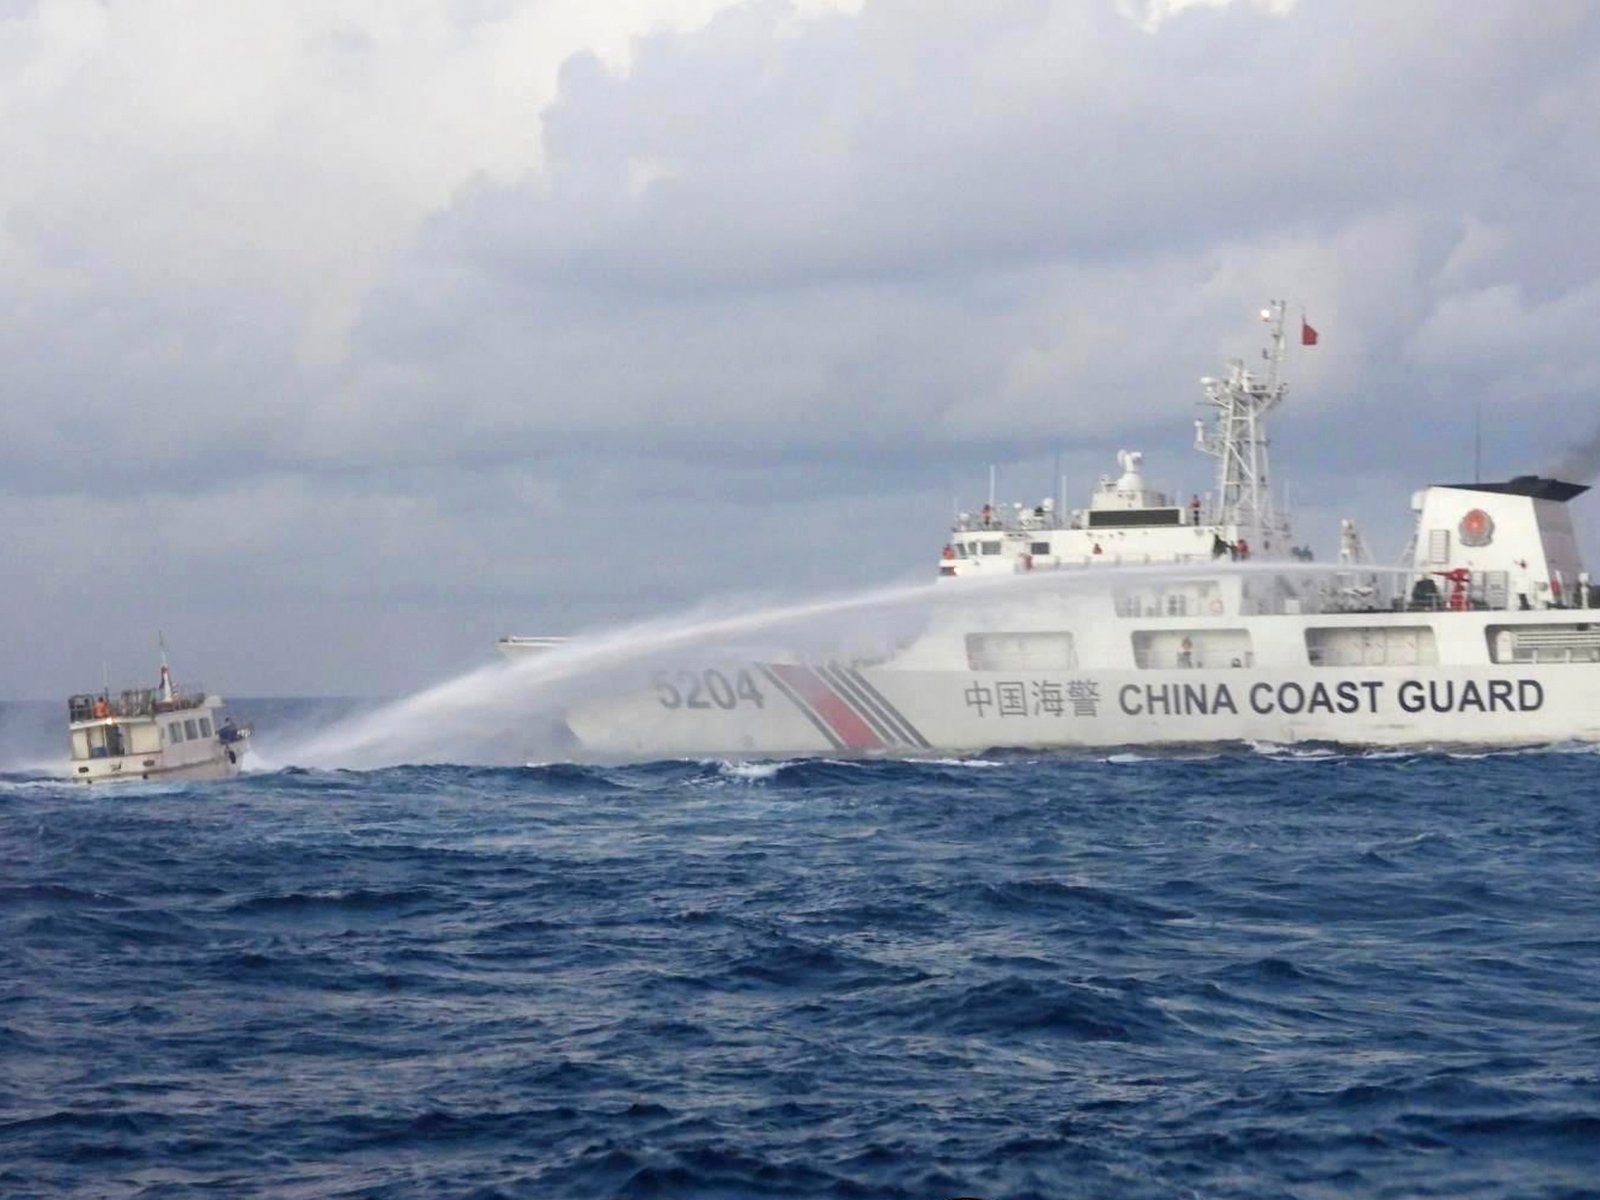 How an impasse in the South China Sea drove the Philippines US closer | South China Sea News